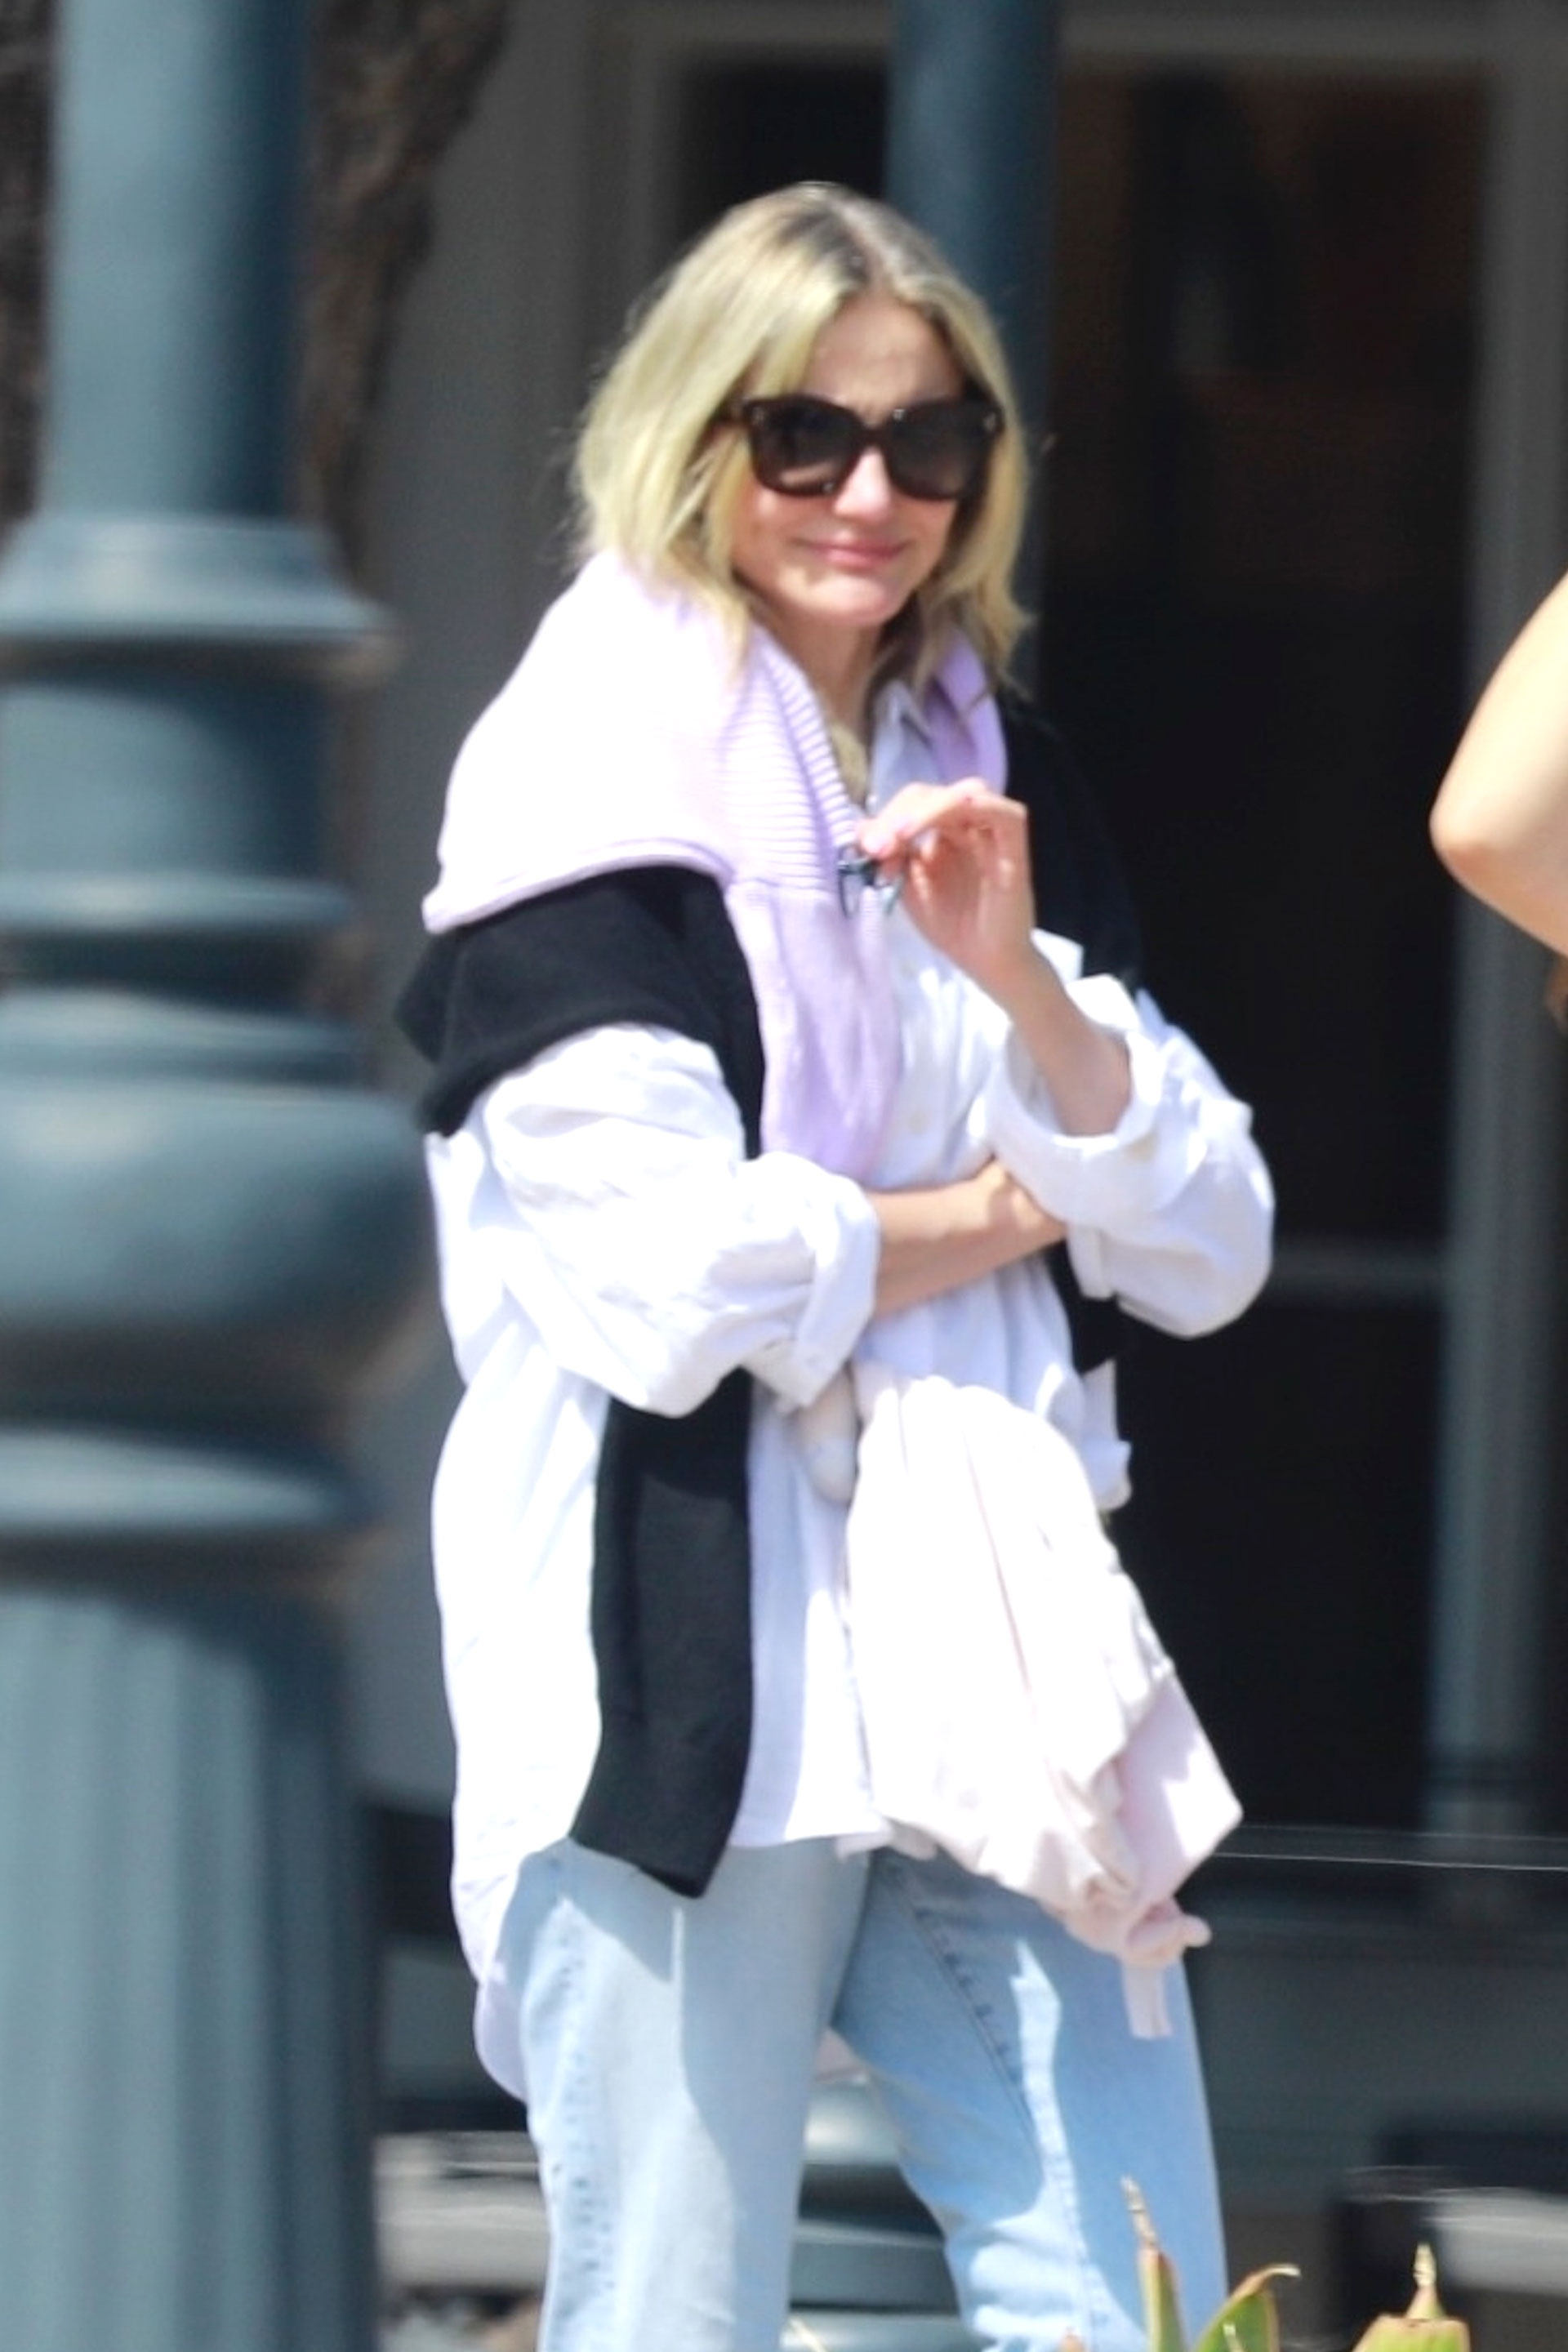 Cameron Diaz and one of her last images: in late July in Malibu, after lunch with her husband and daughter (Photo: The Grosby Group)